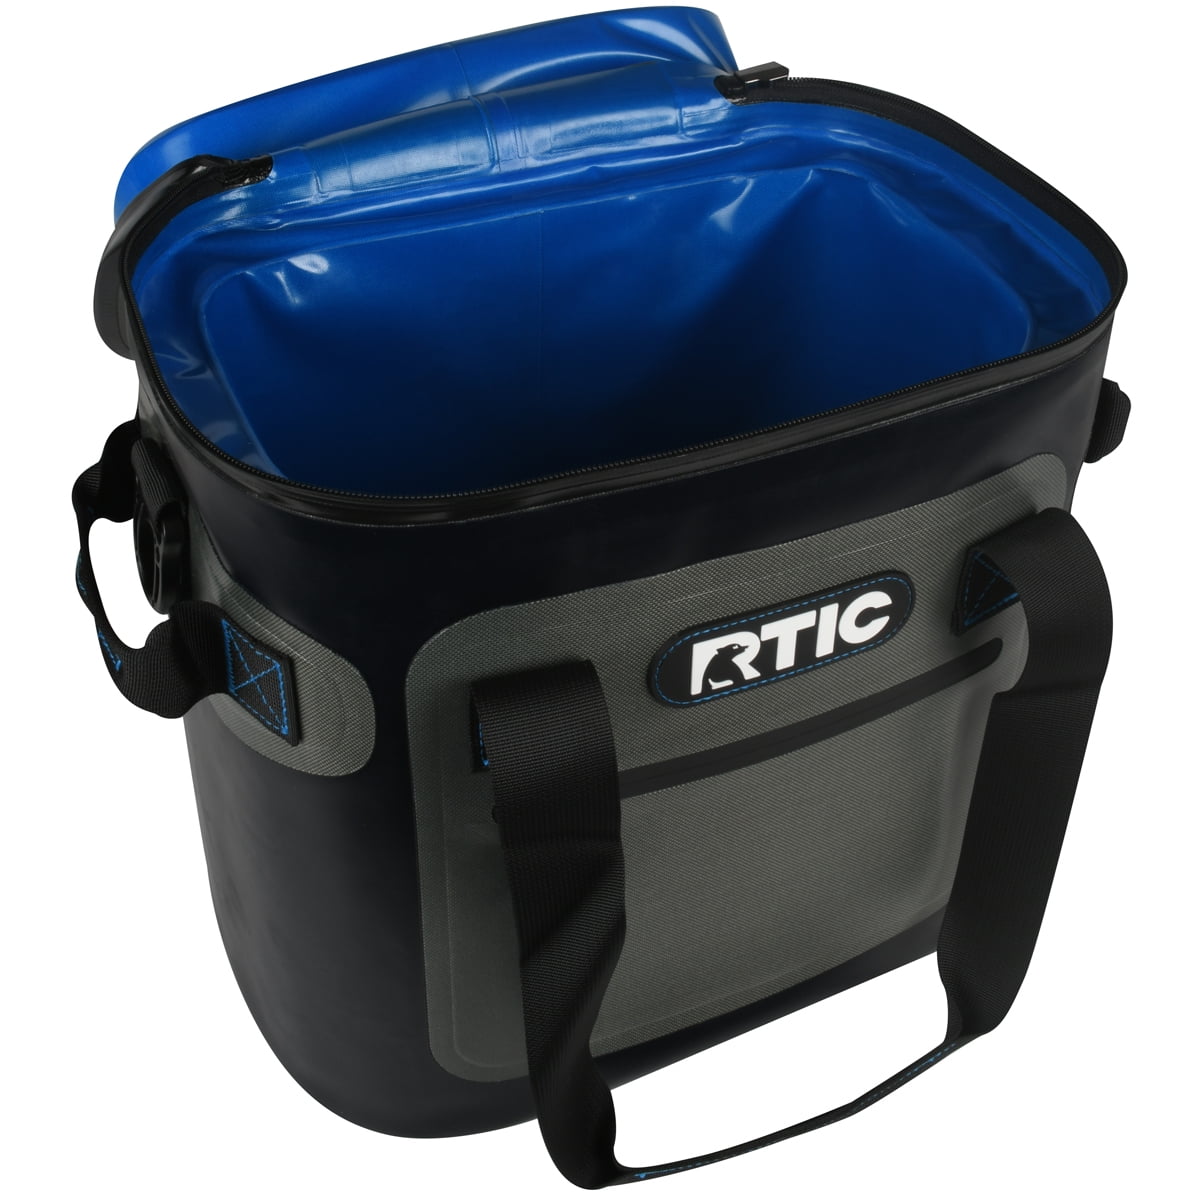 RTIC Soft Cooler 20 Can, Insulated Bag Portable Ice Chest Box for Lunch,  Beach, Drink, Beverage, Travel, Camping, Picnic, Car, Trips, Floating Cooler  Leak-Proof with Zipper, Blue/Grey 